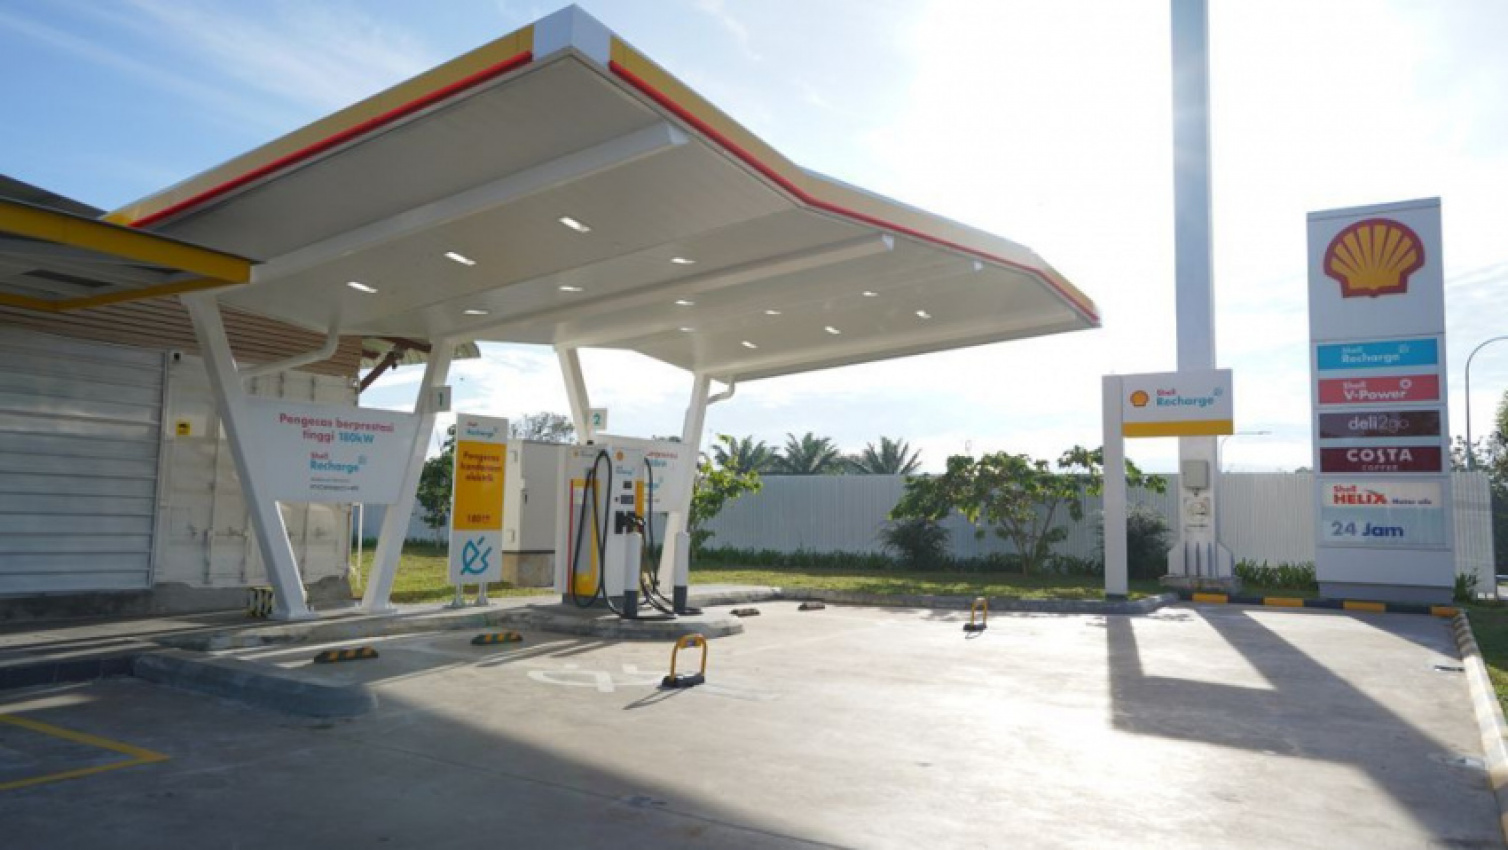 autos, cars, porsche, auto news, dc chargers malaysia, ev charging malaysia, hpc charging station malaysia, porsche asia pacific, shell asia pacific, shell and porsche's first dc fast charging station is now open in johor